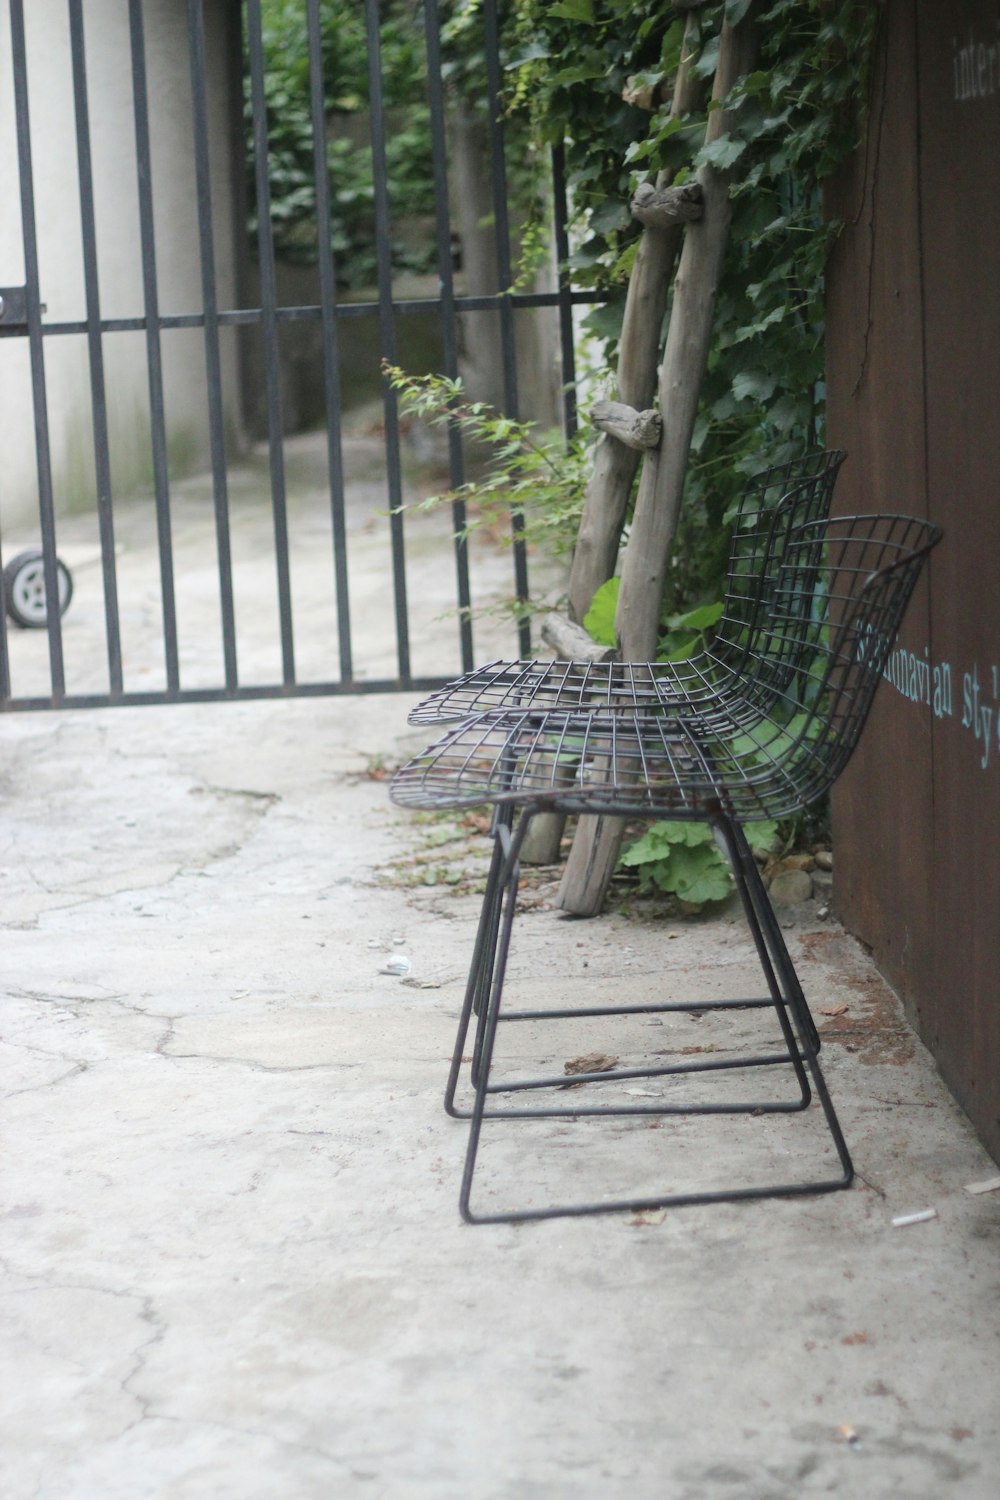 a metal chair sitting on a sidewalk next to a fence